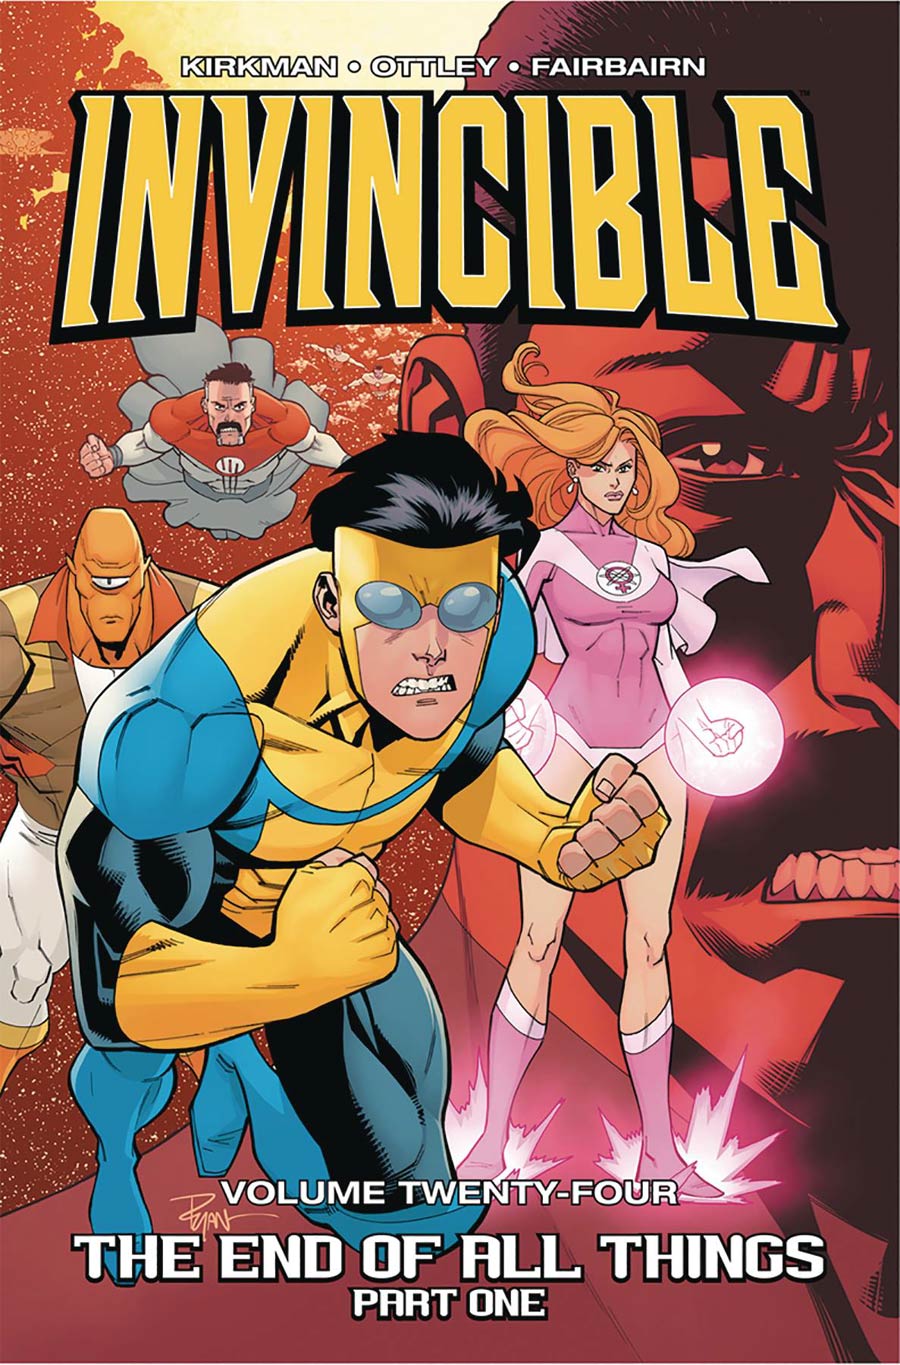 Invincible Vol 24 End Of All Things Part 1 TP